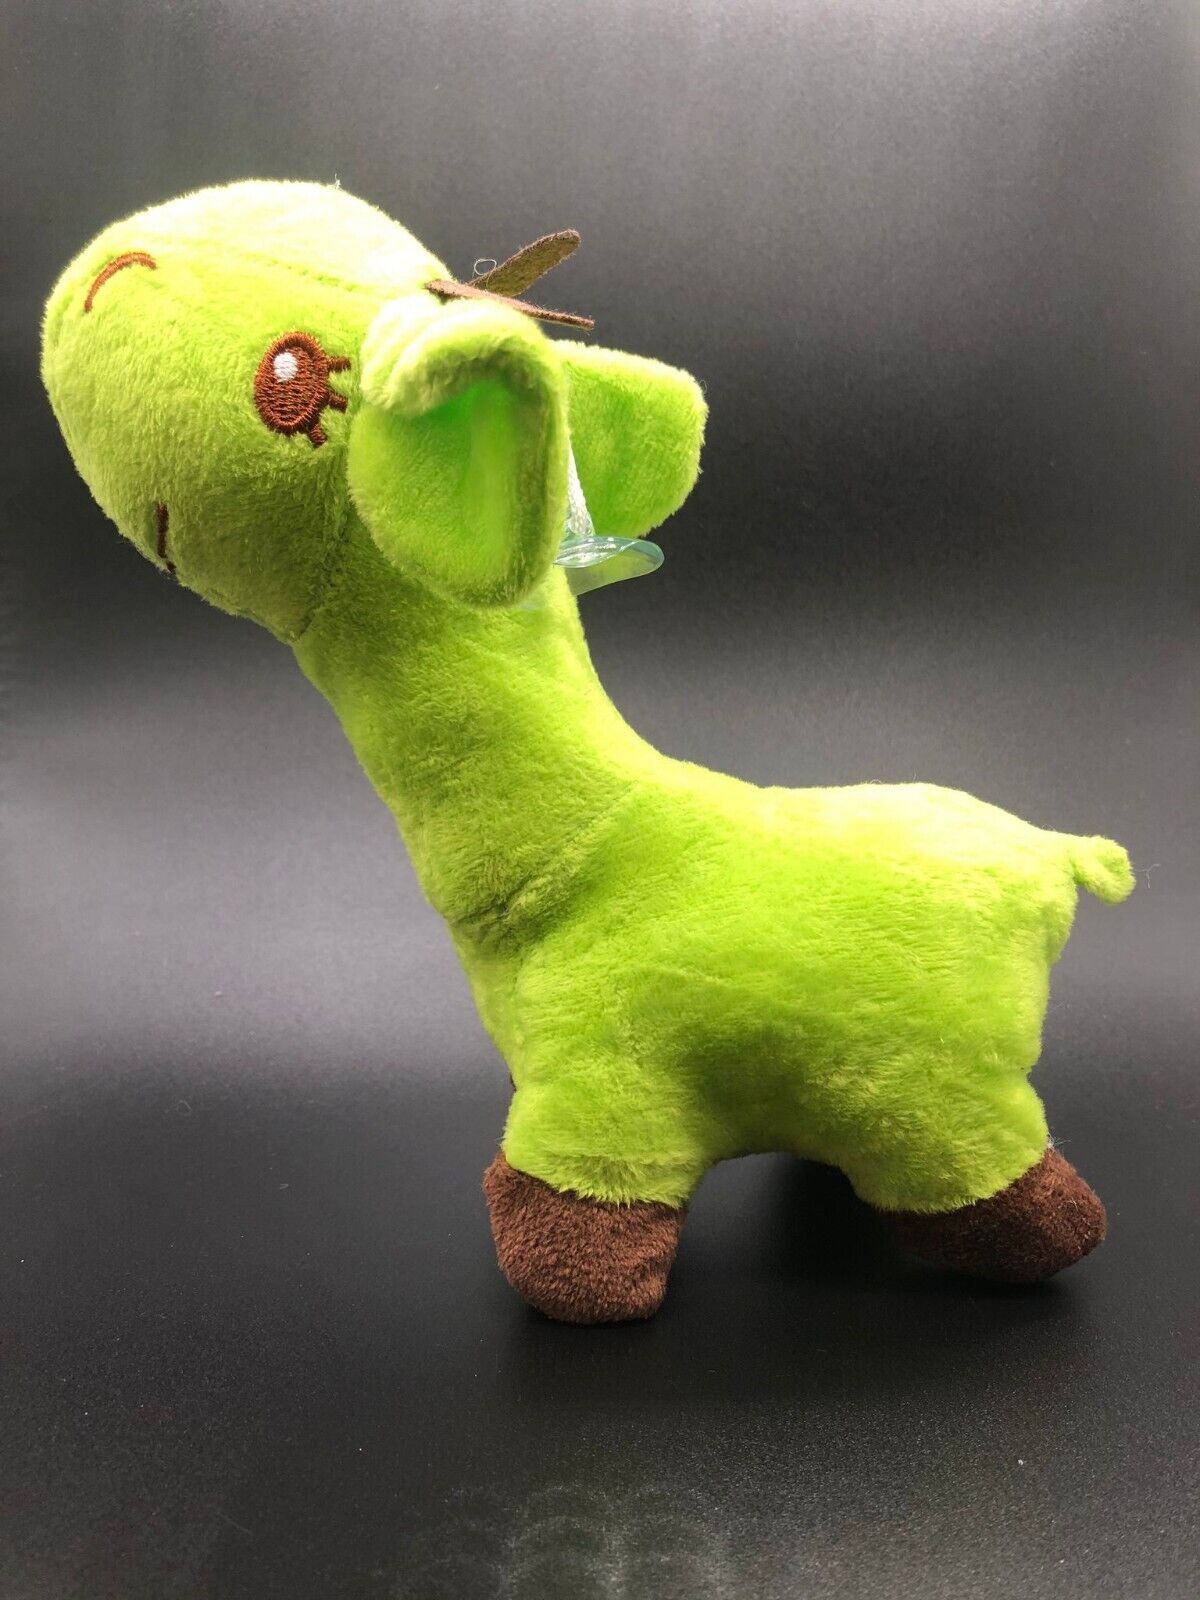 Green Giraffe Plush Toy - Soft and Cuddly Gift for Kids of All Ages